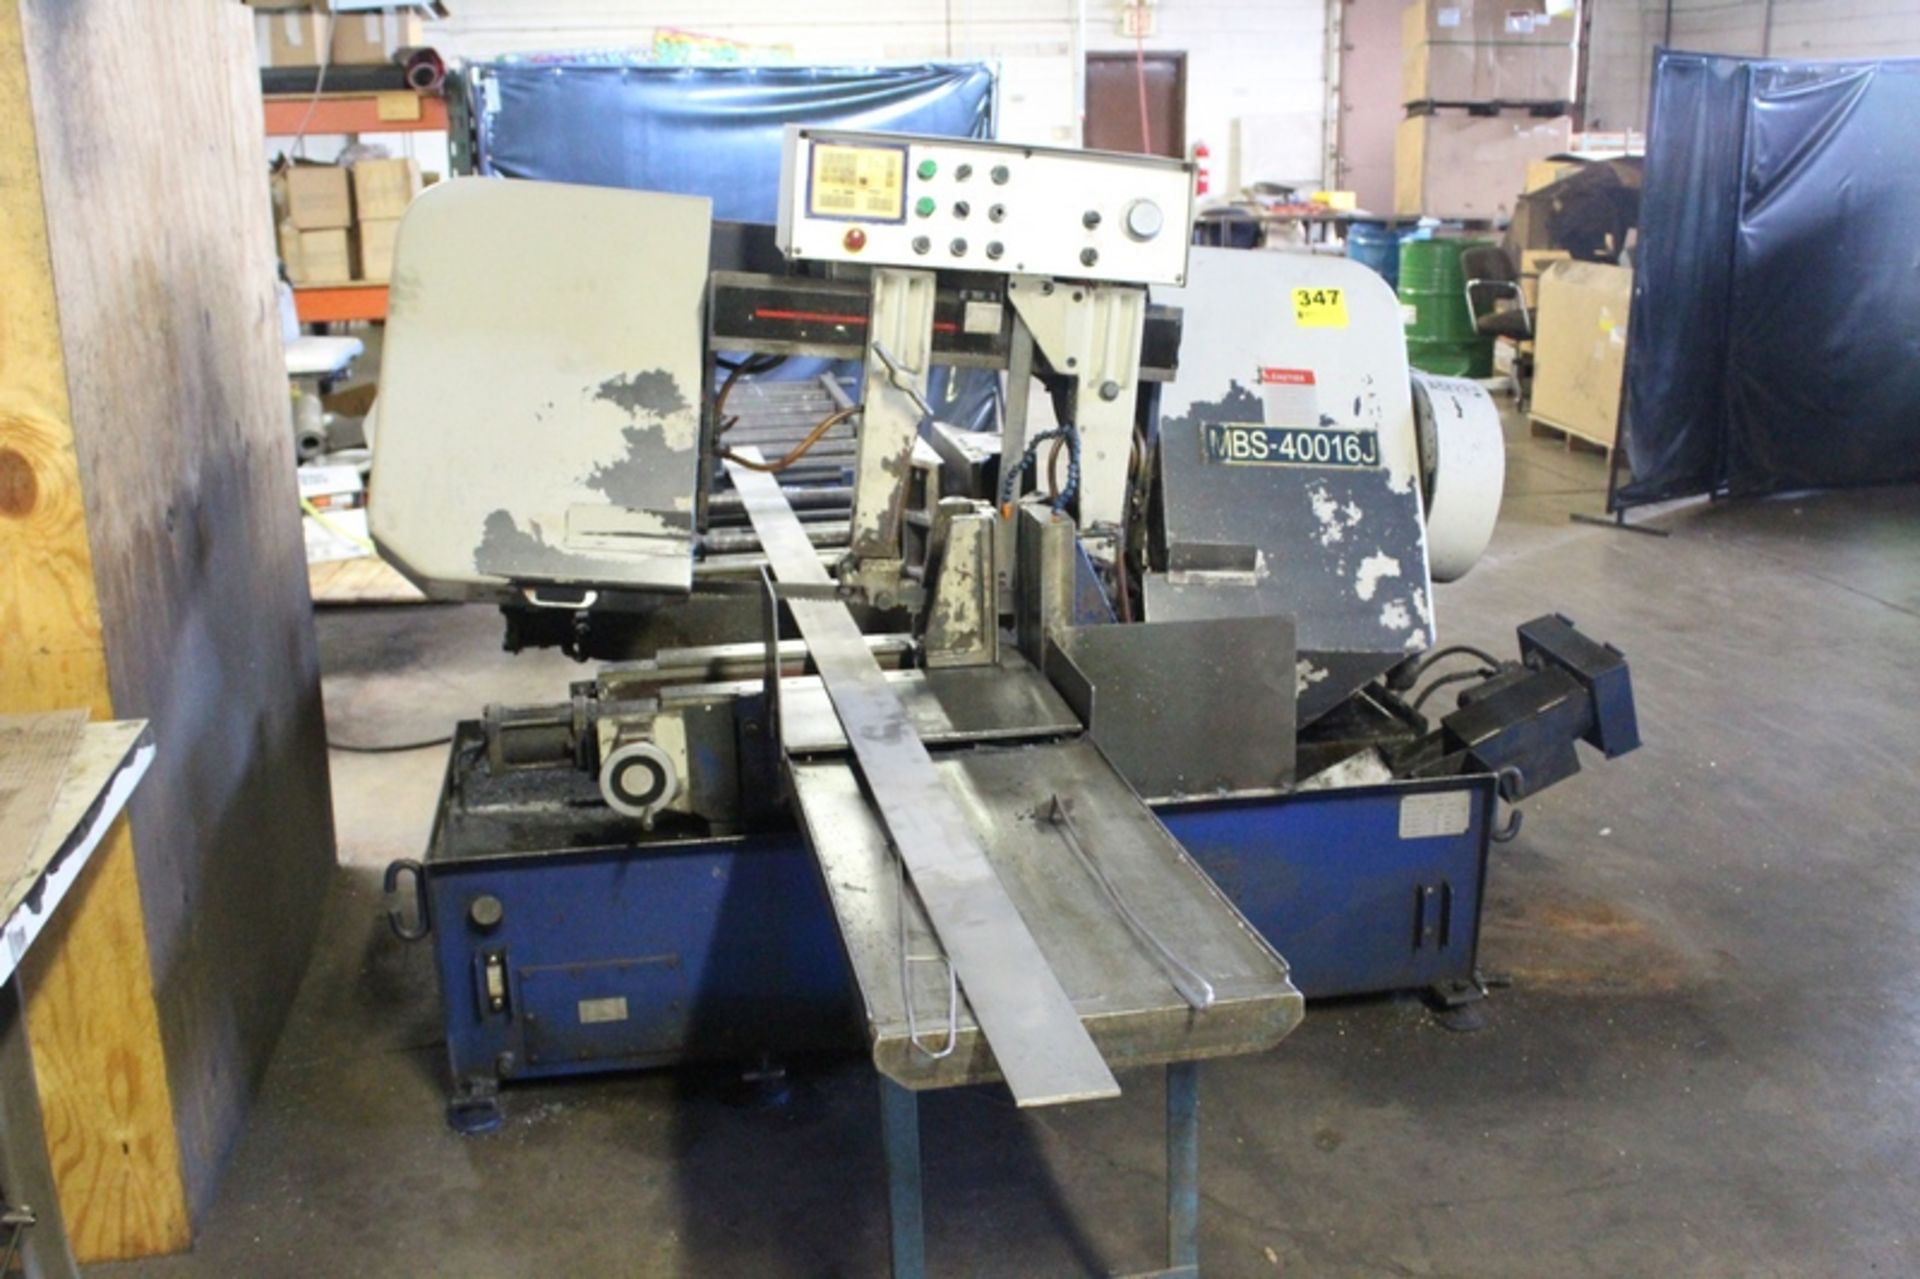 JET MODEL MBS-40016J AUTOMATIC HORIZONTAL BAND SAW, S/N 980716 (NEW 1998), WITH AUTOMATIC STOCK - Image 2 of 8